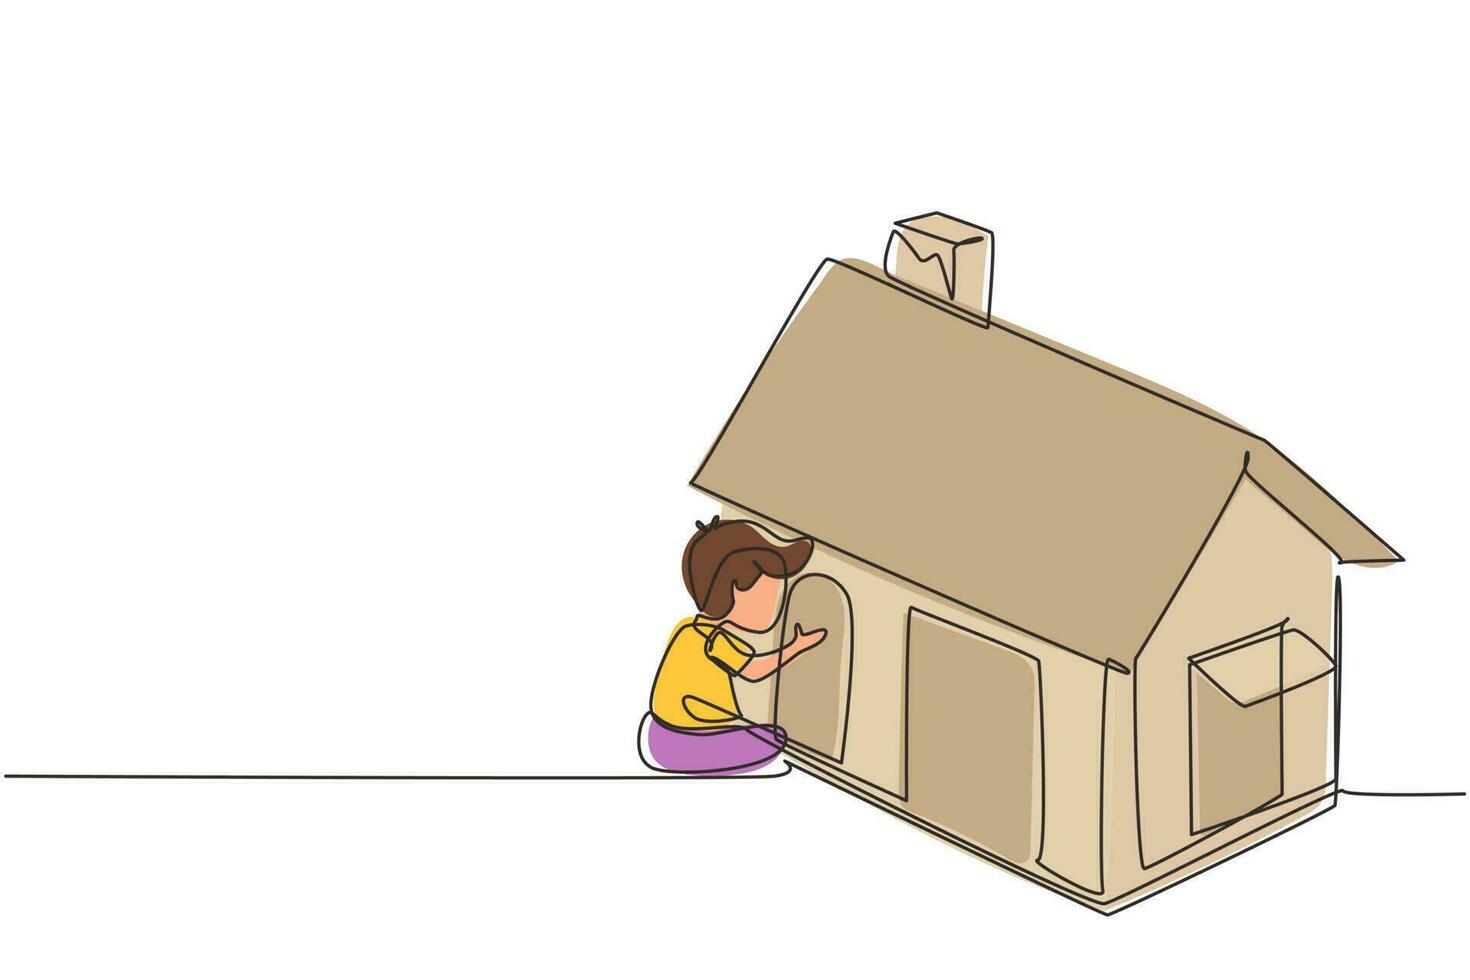 7 EASY CARDBOARD PLAY HOUSES YOU COULD TOTALLY MAKE